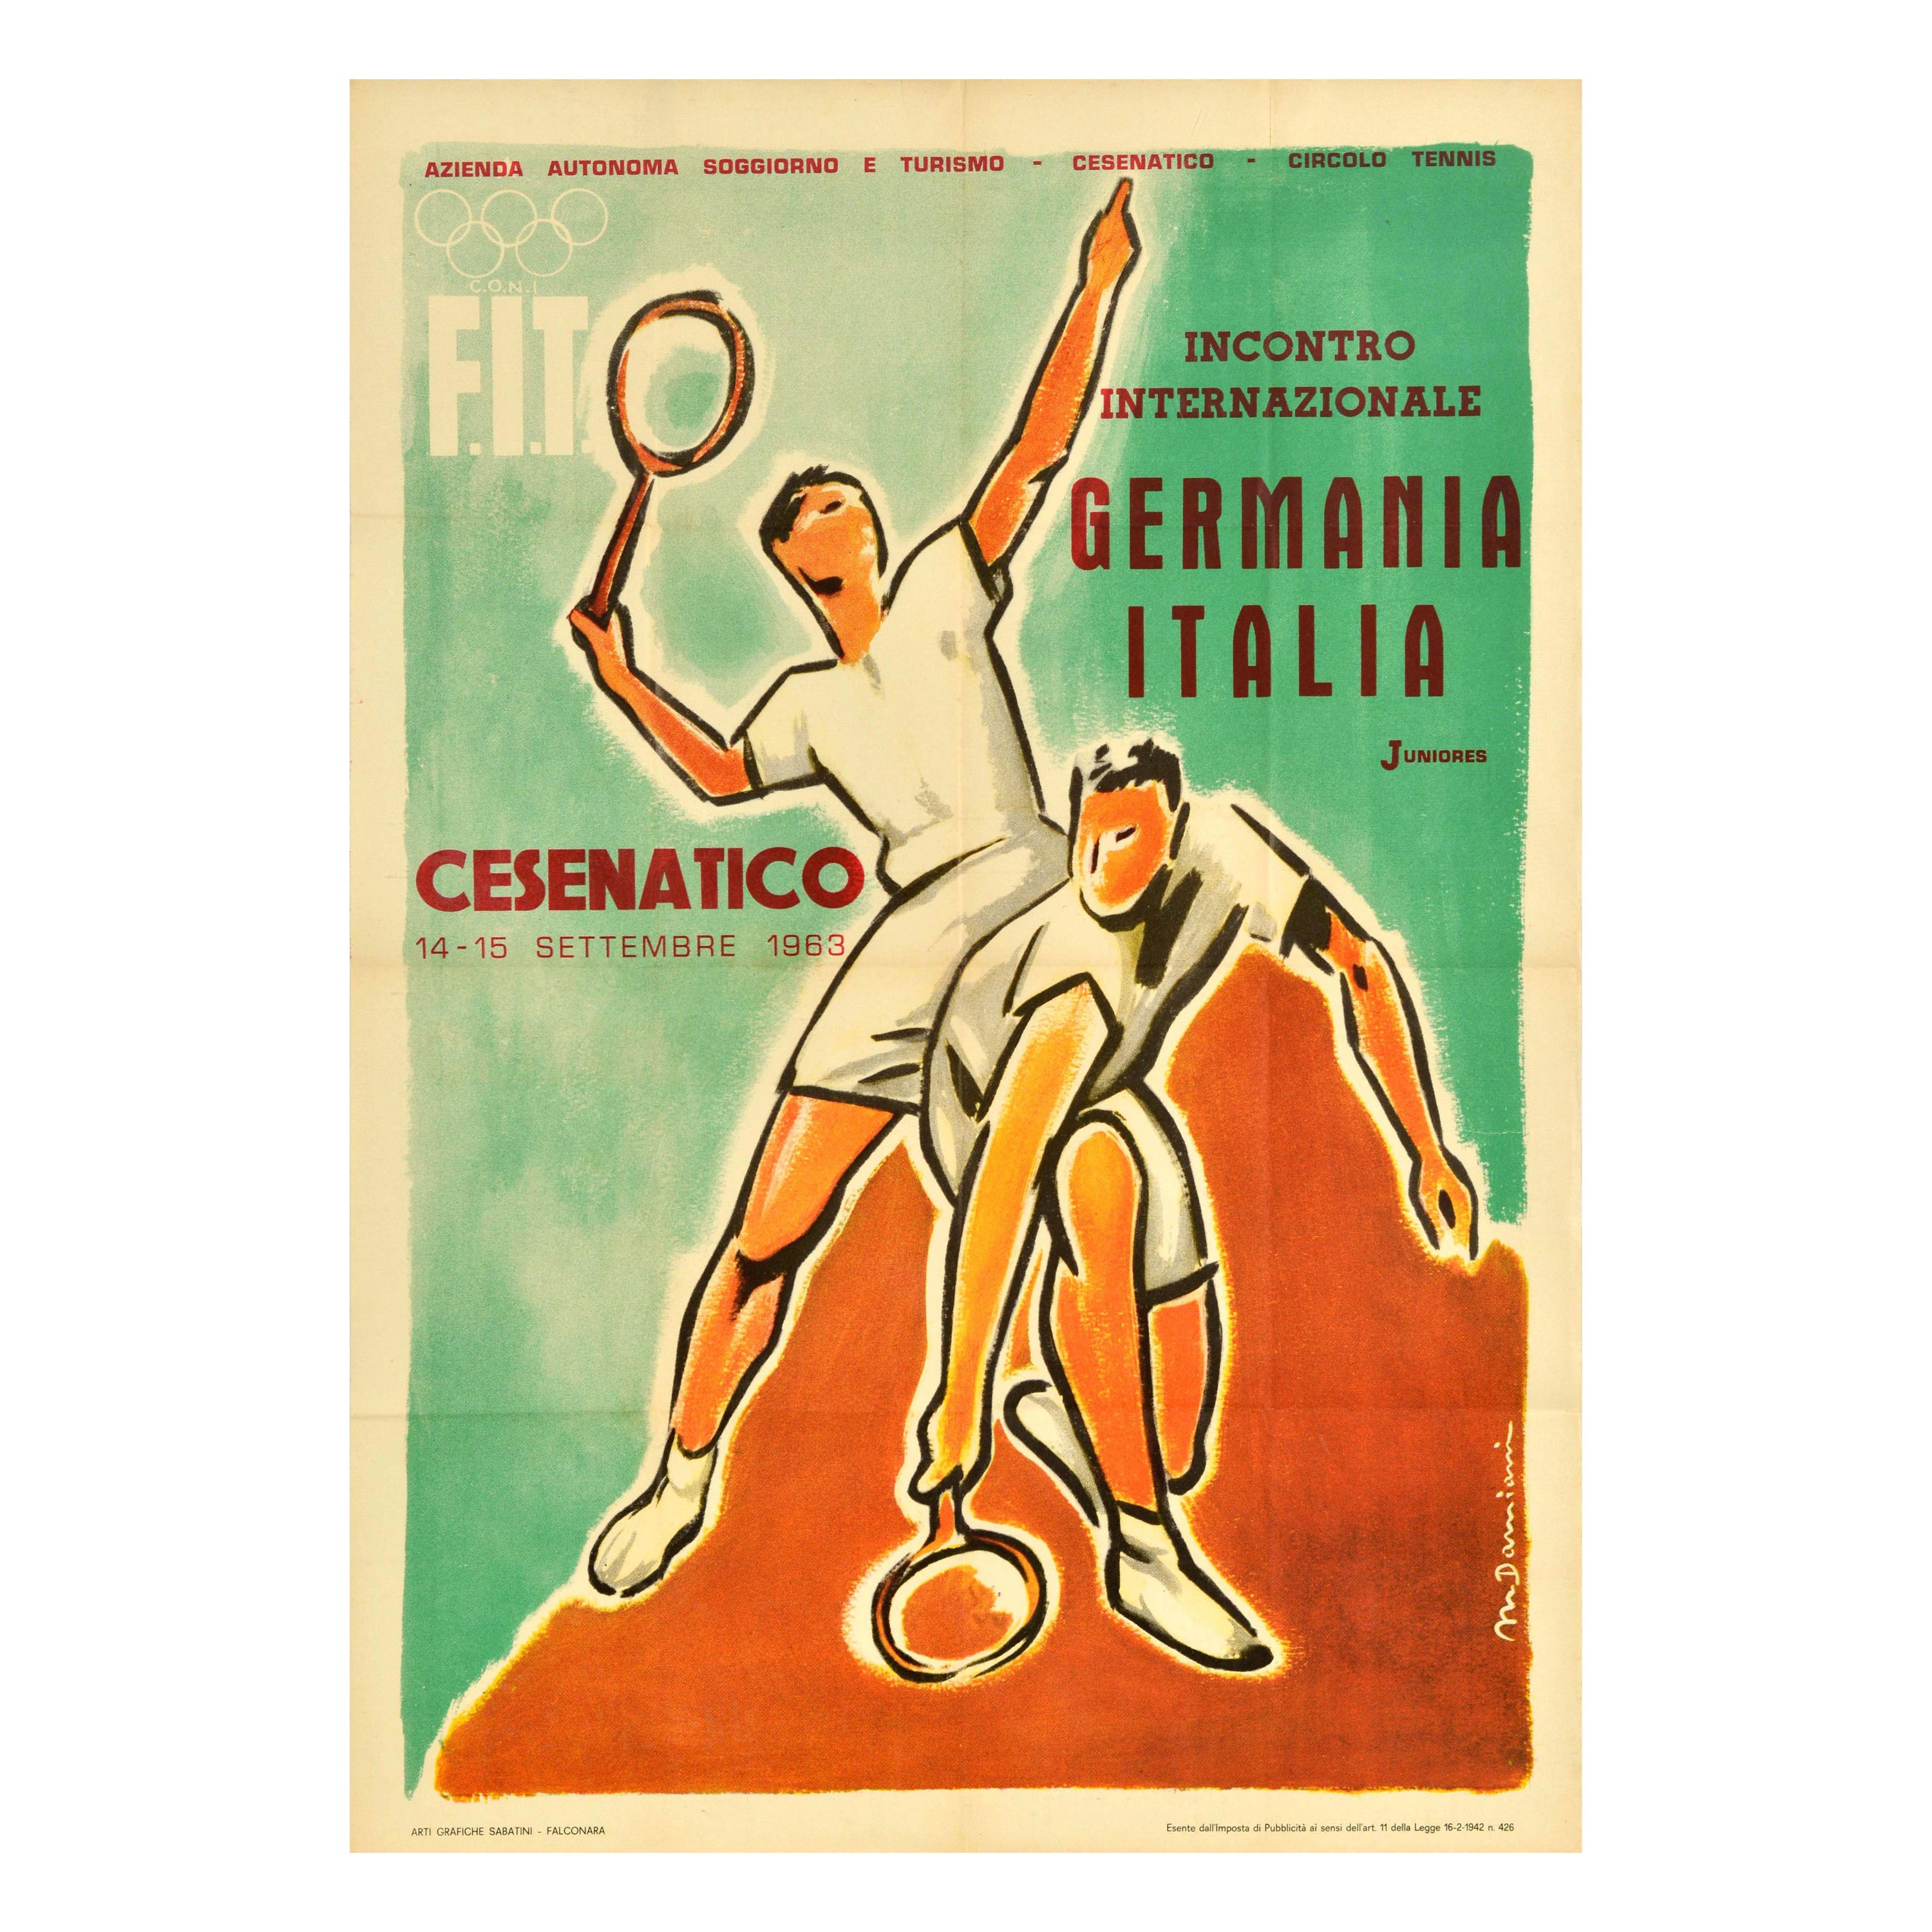 Original Vintage Sport Poster Cesenatico Tennis Meeting Germany Italy Coni FIT For Sale